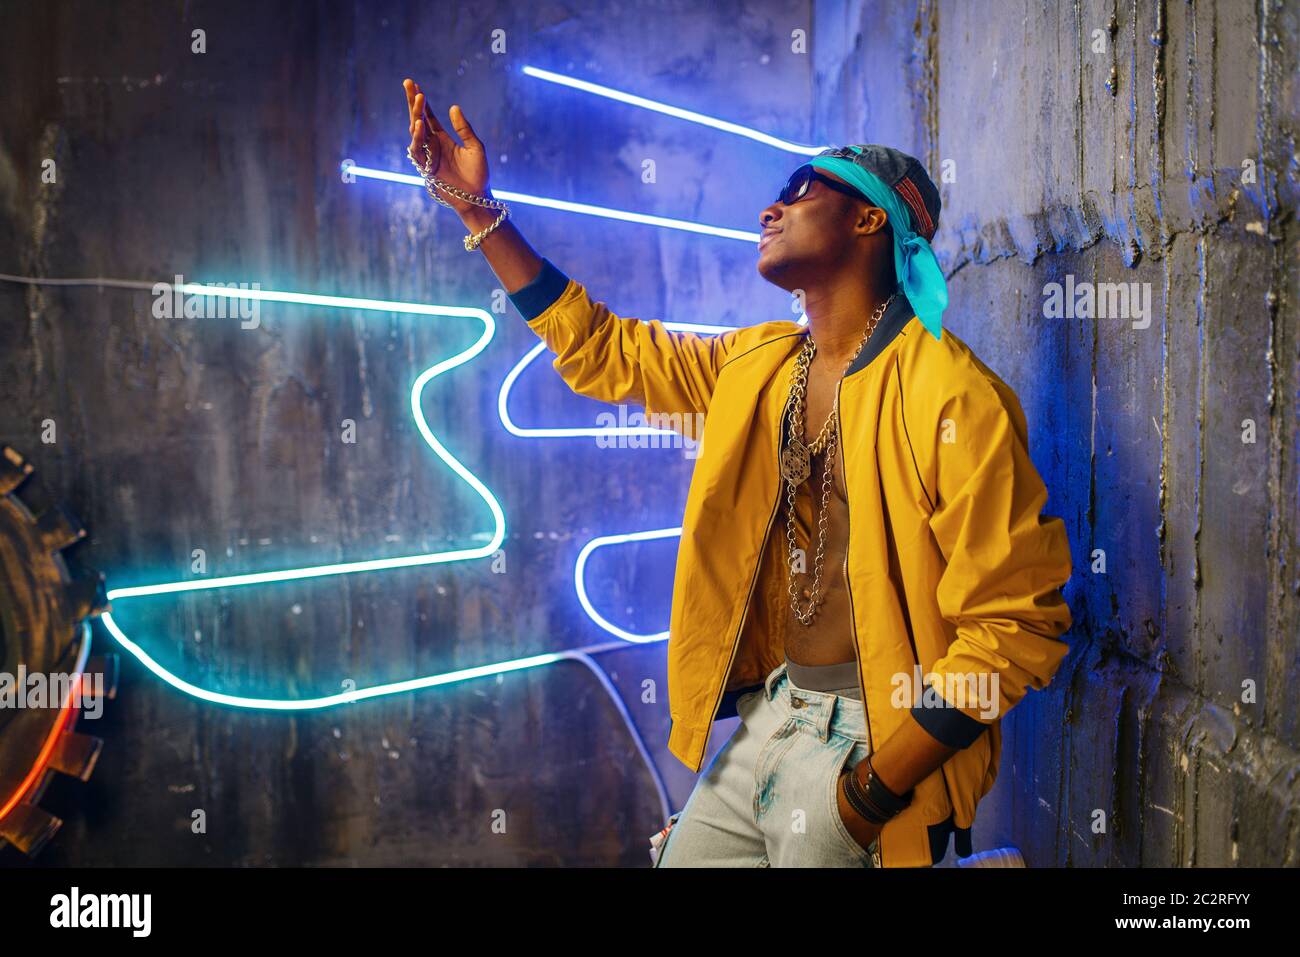 Black rapper in underpass neon light on background. Rap performer in club with grunge walls, underground music Stock Photo